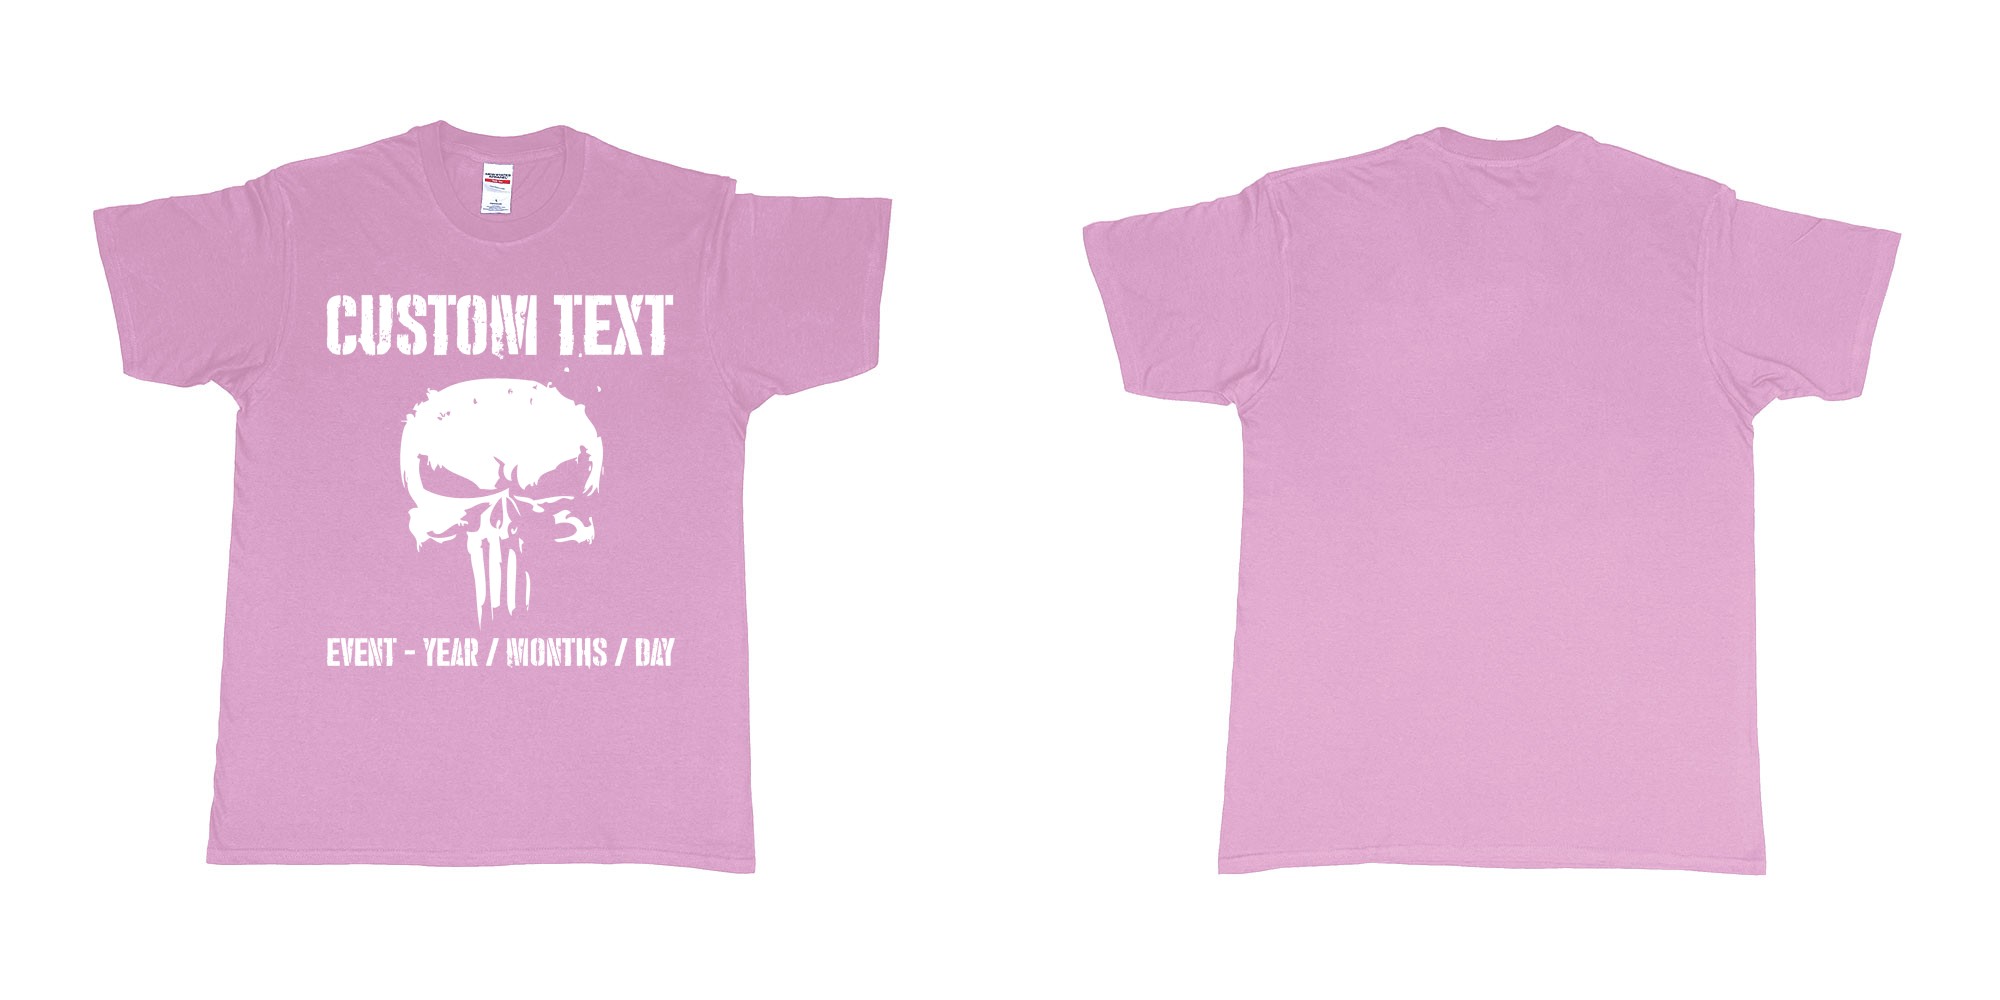 Custom tshirt design the punisher scull logo custom text in fabric color light-pink choice your own text made in Bali by The Pirate Way